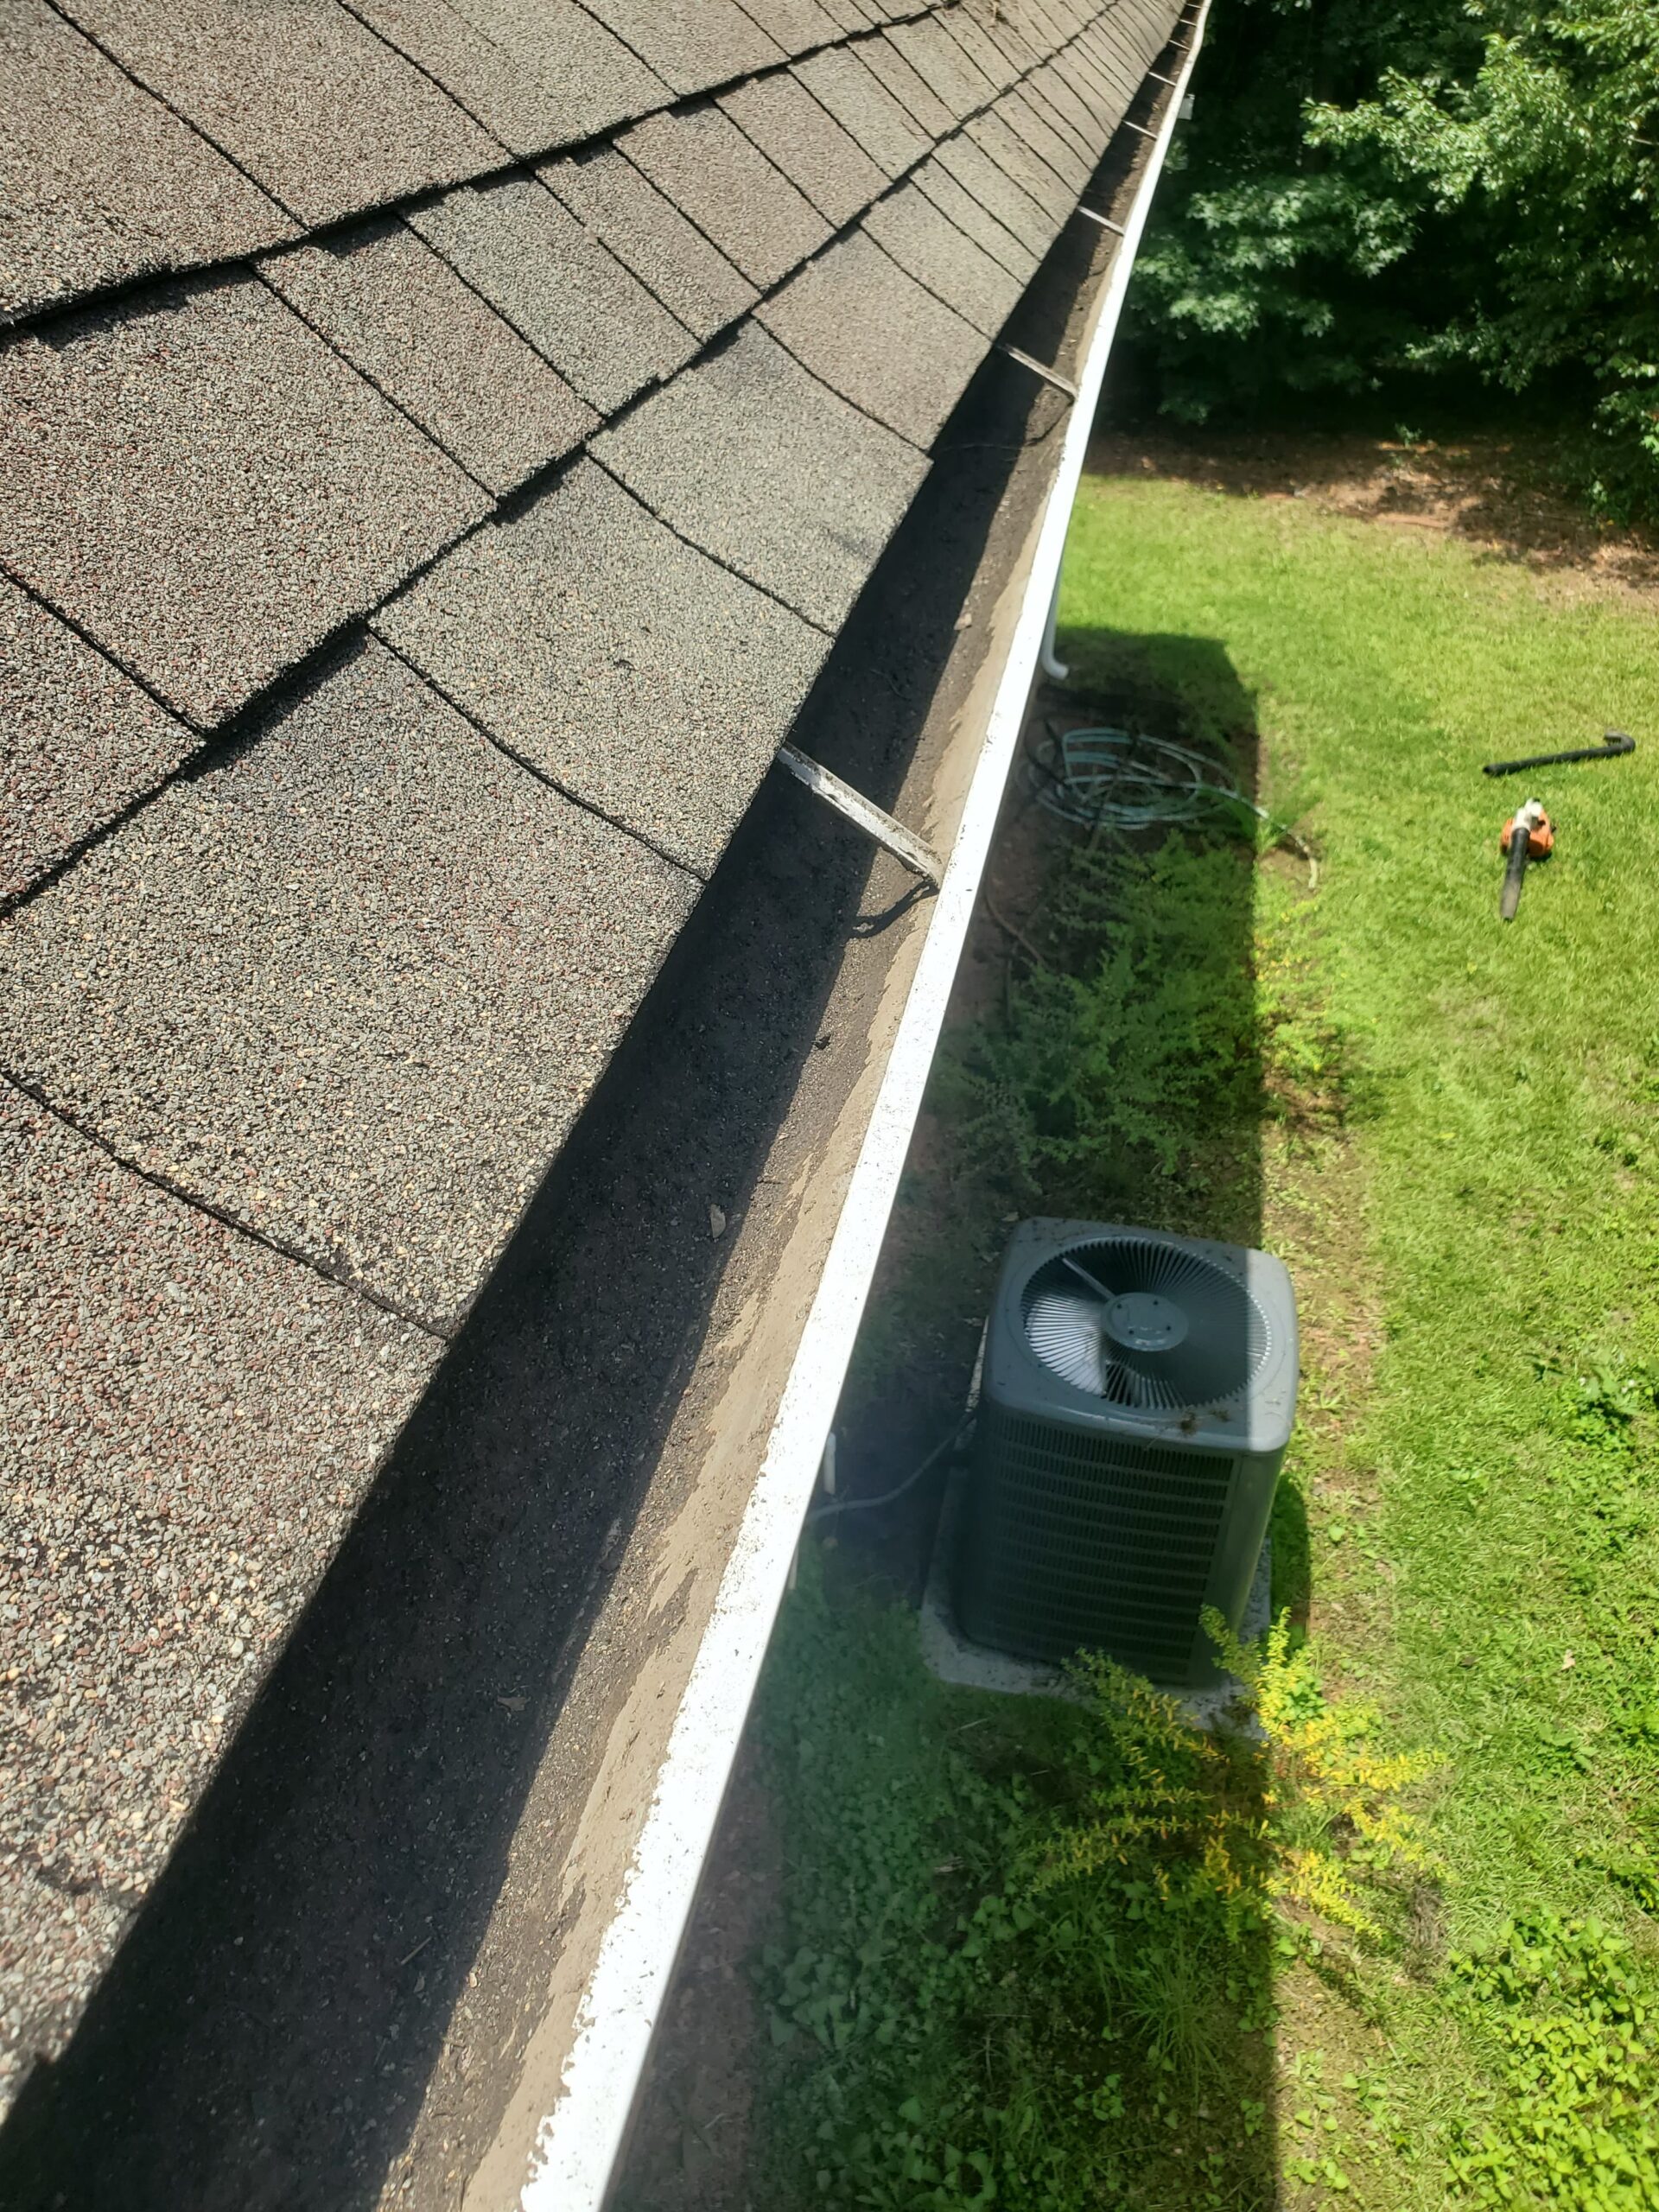 Gutter Cleaning Company Near Me Indianapolis In